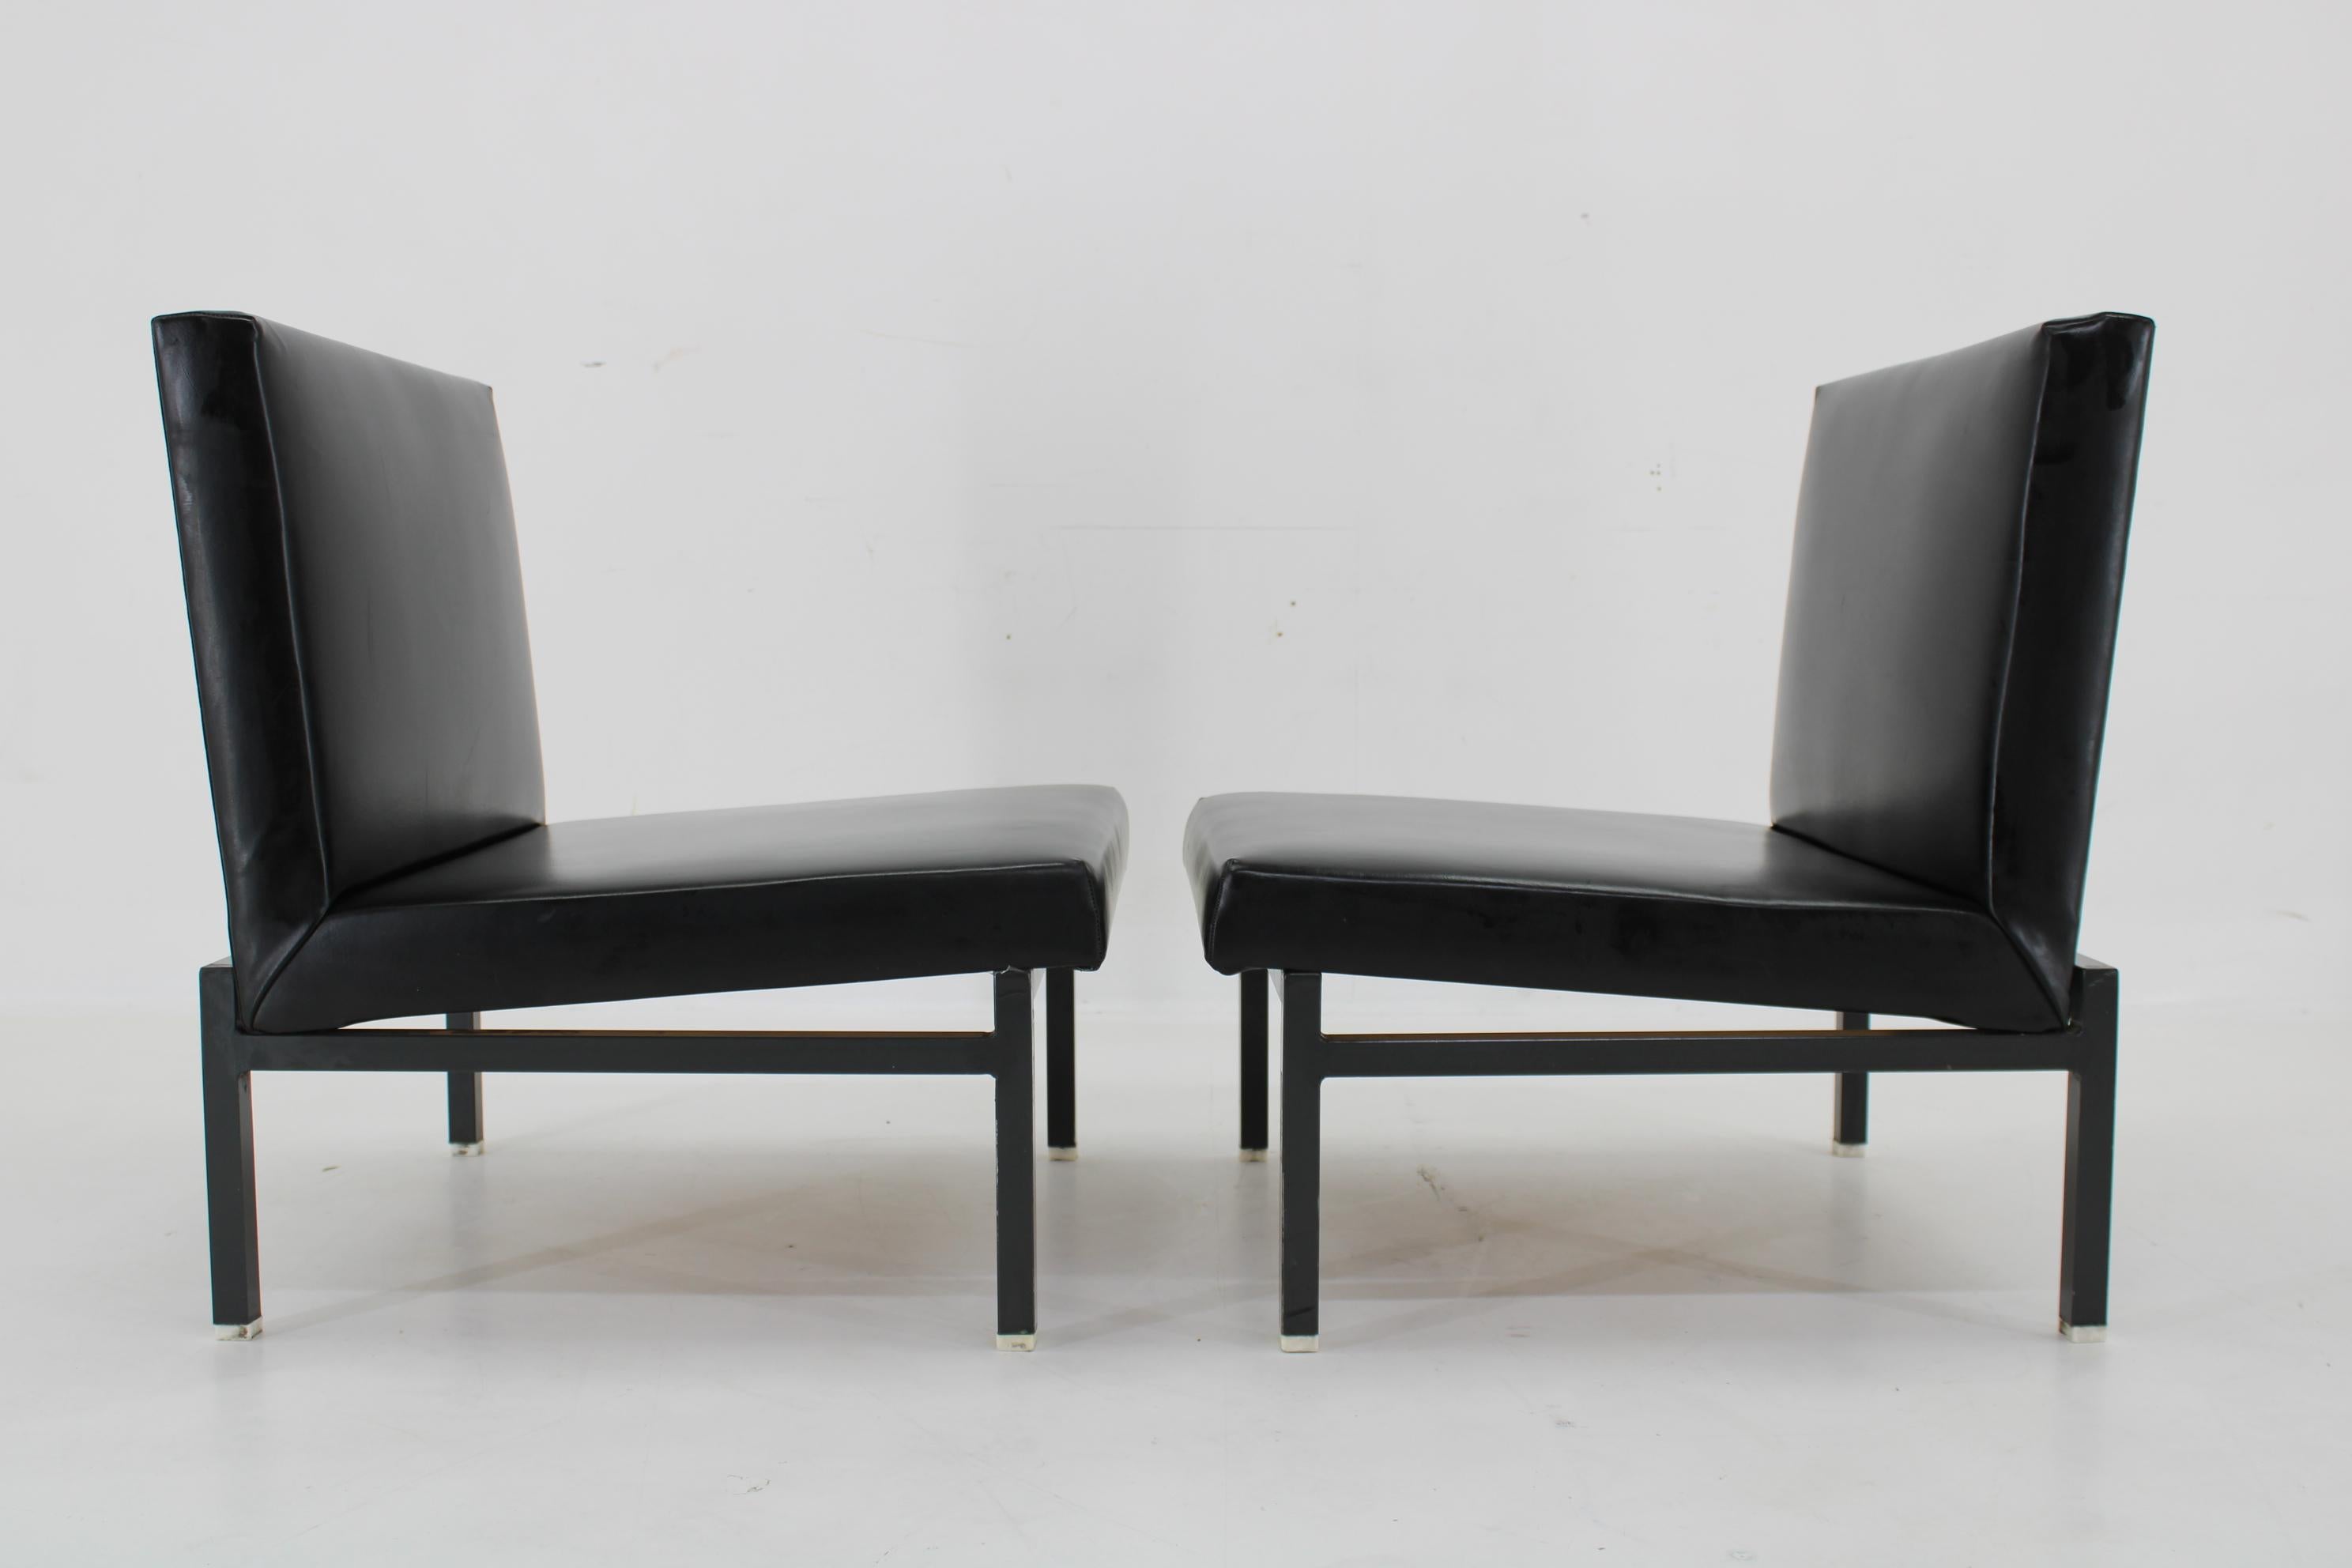 1970s Pair of Leatherette Lounge Chairs  Czechoslovakia For Sale 3